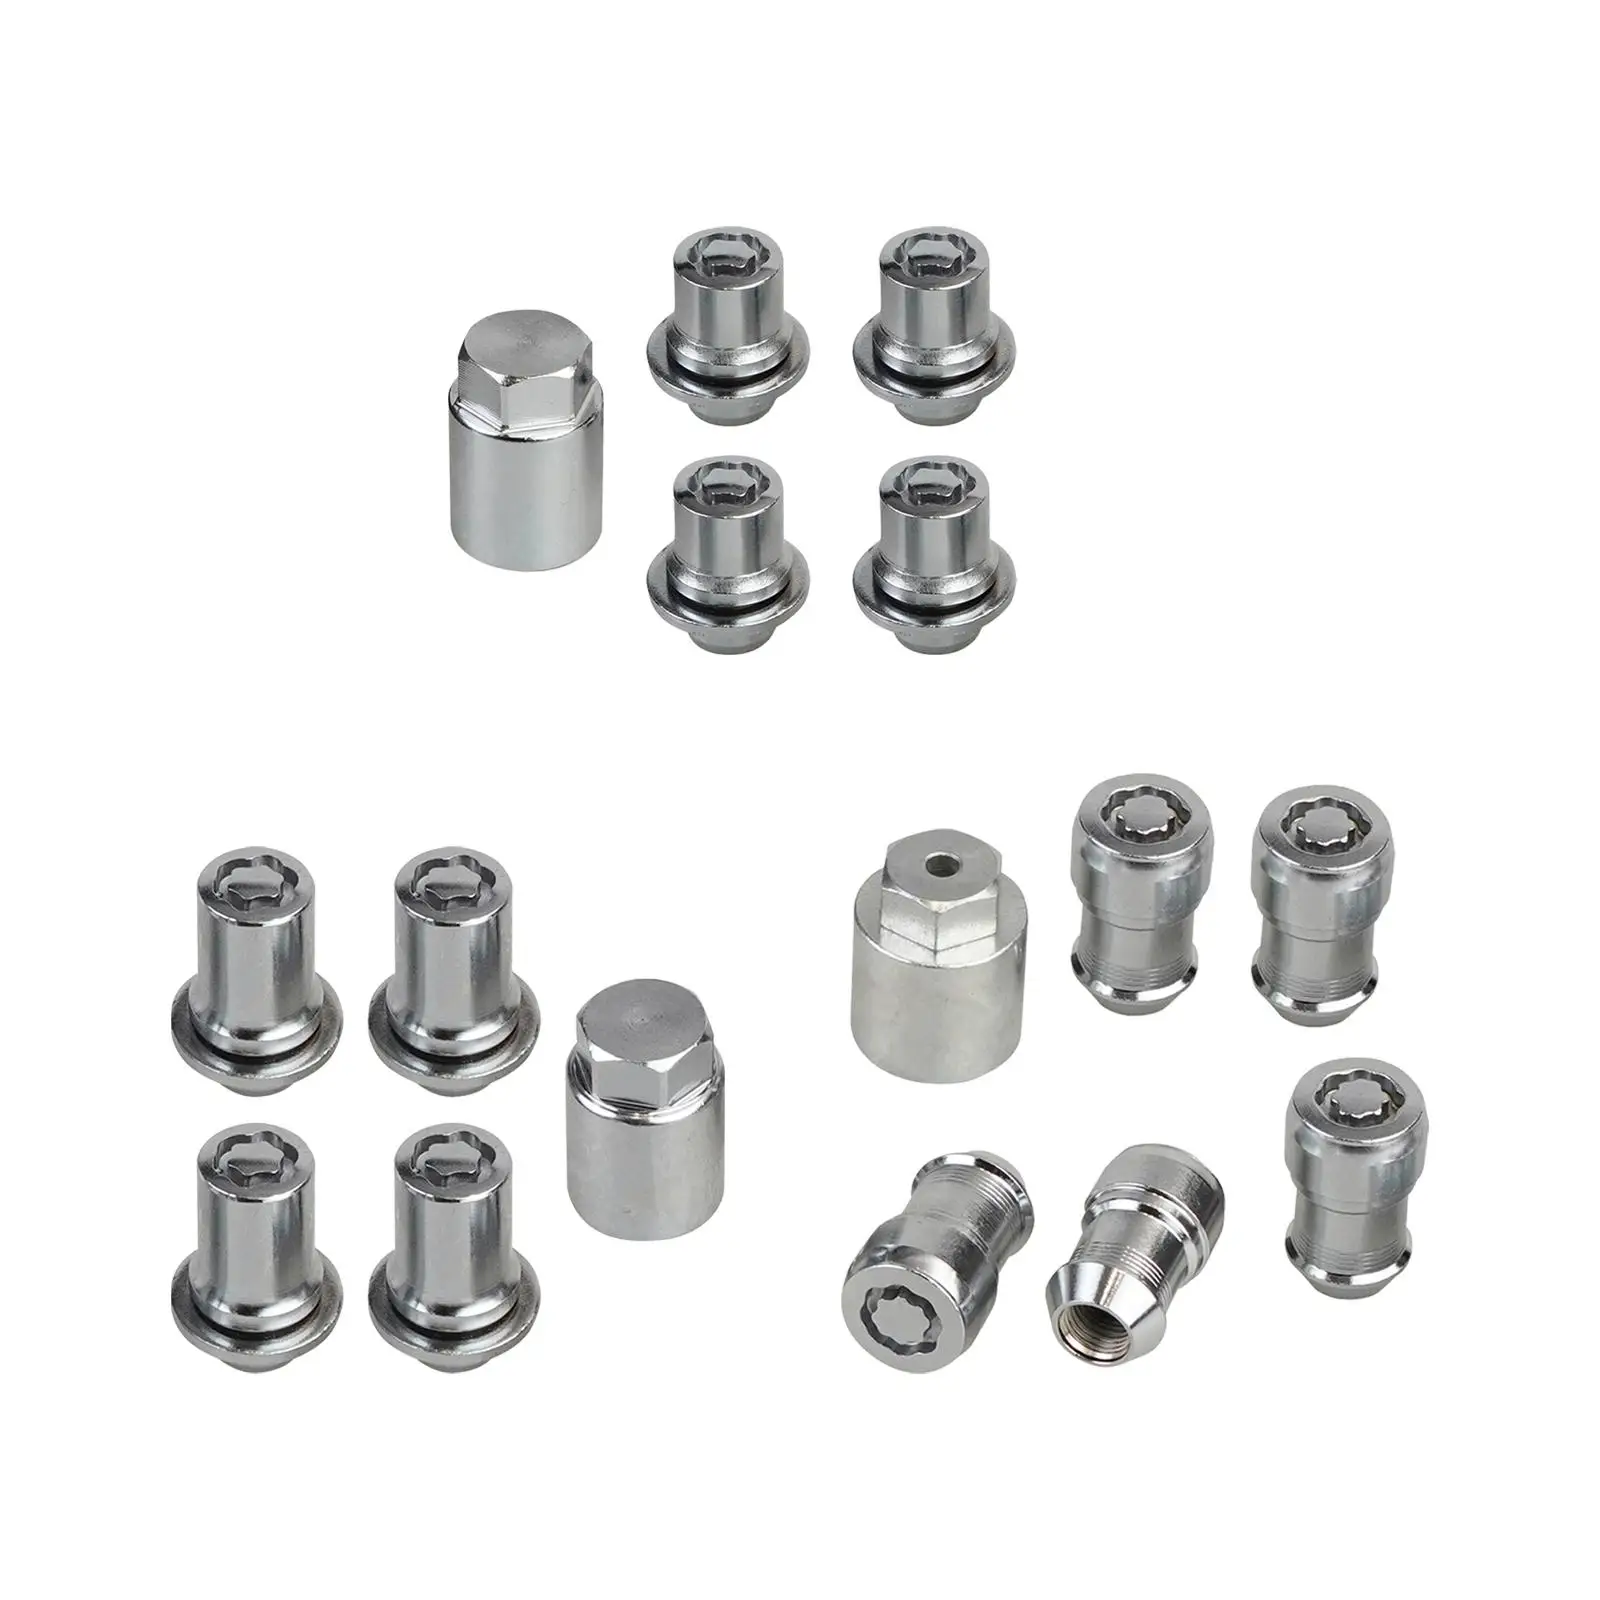 Wheel Lock Lug Nuts Set Metal Security Spare Parts Fitments Replacement